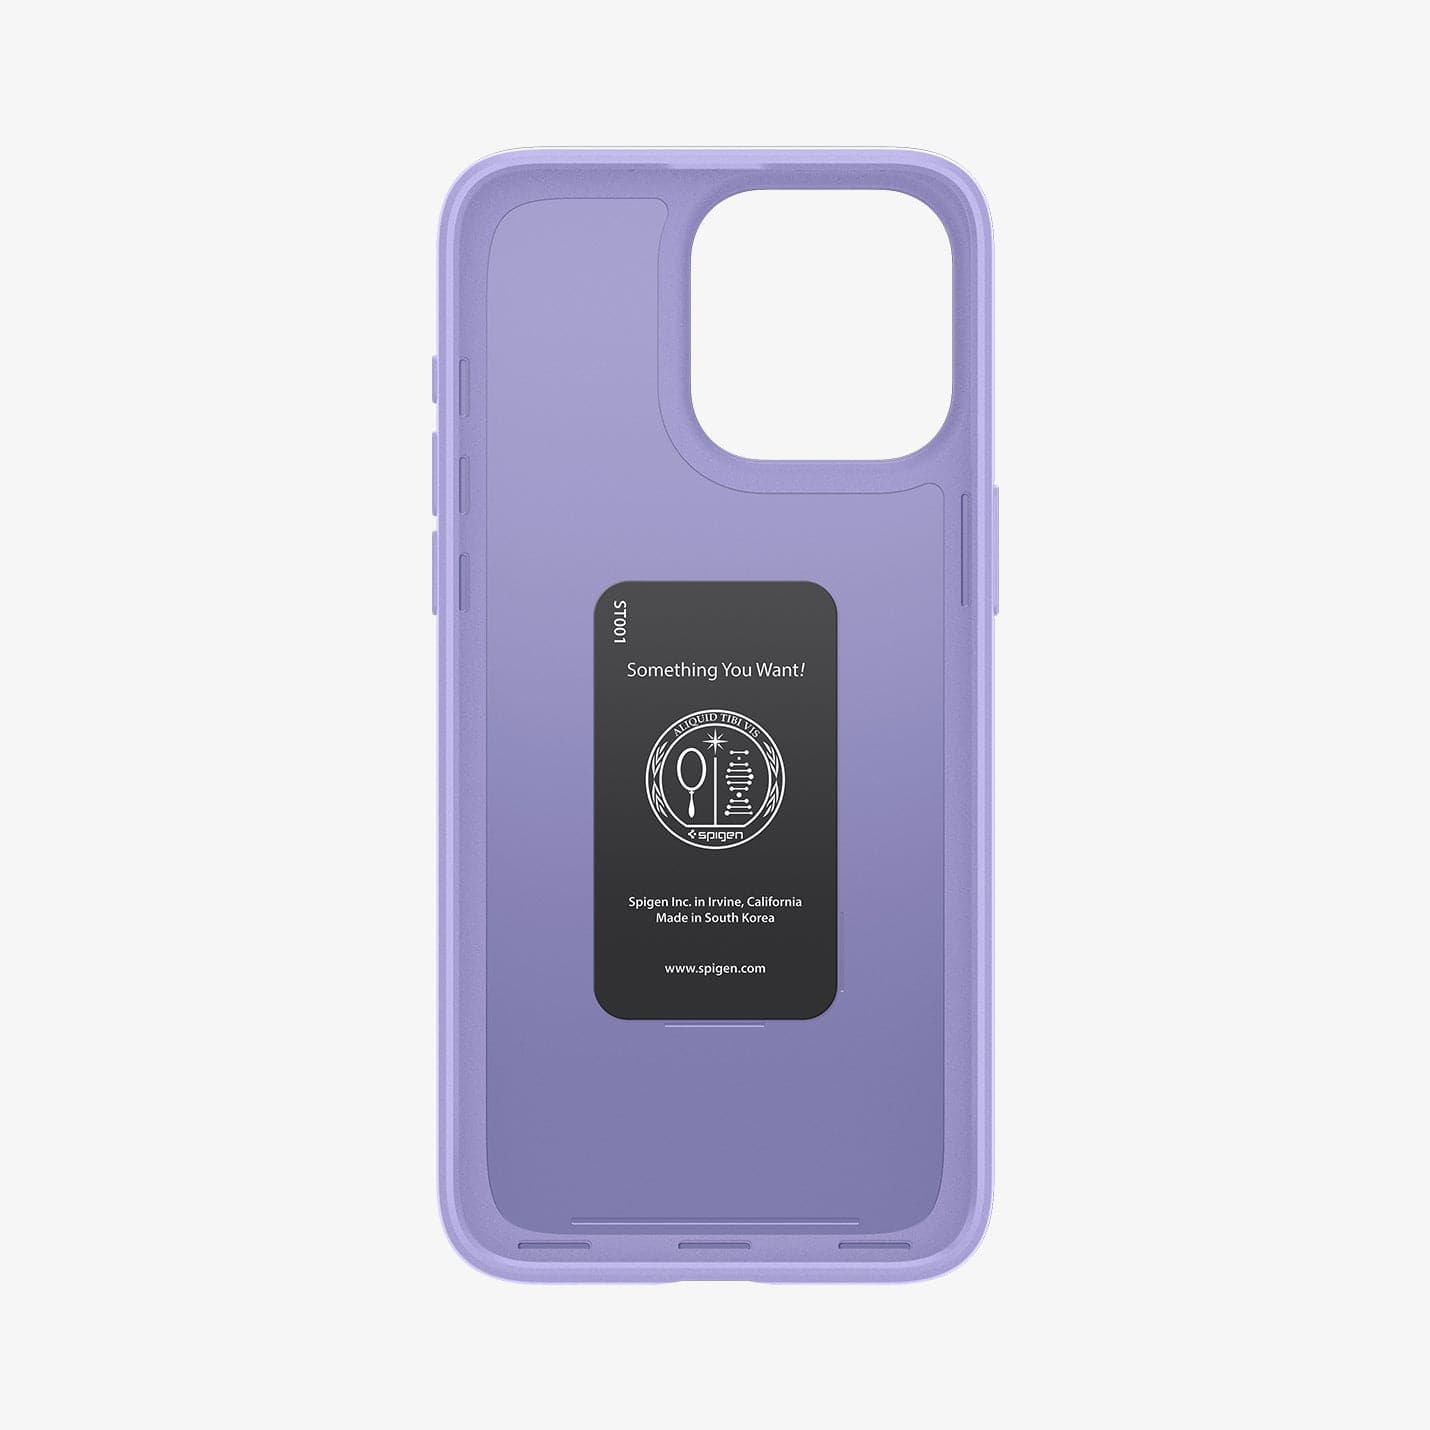 ACS06549 - iPhone 15 Pro Max Case Thin Fit in iris purple showing the inside of case